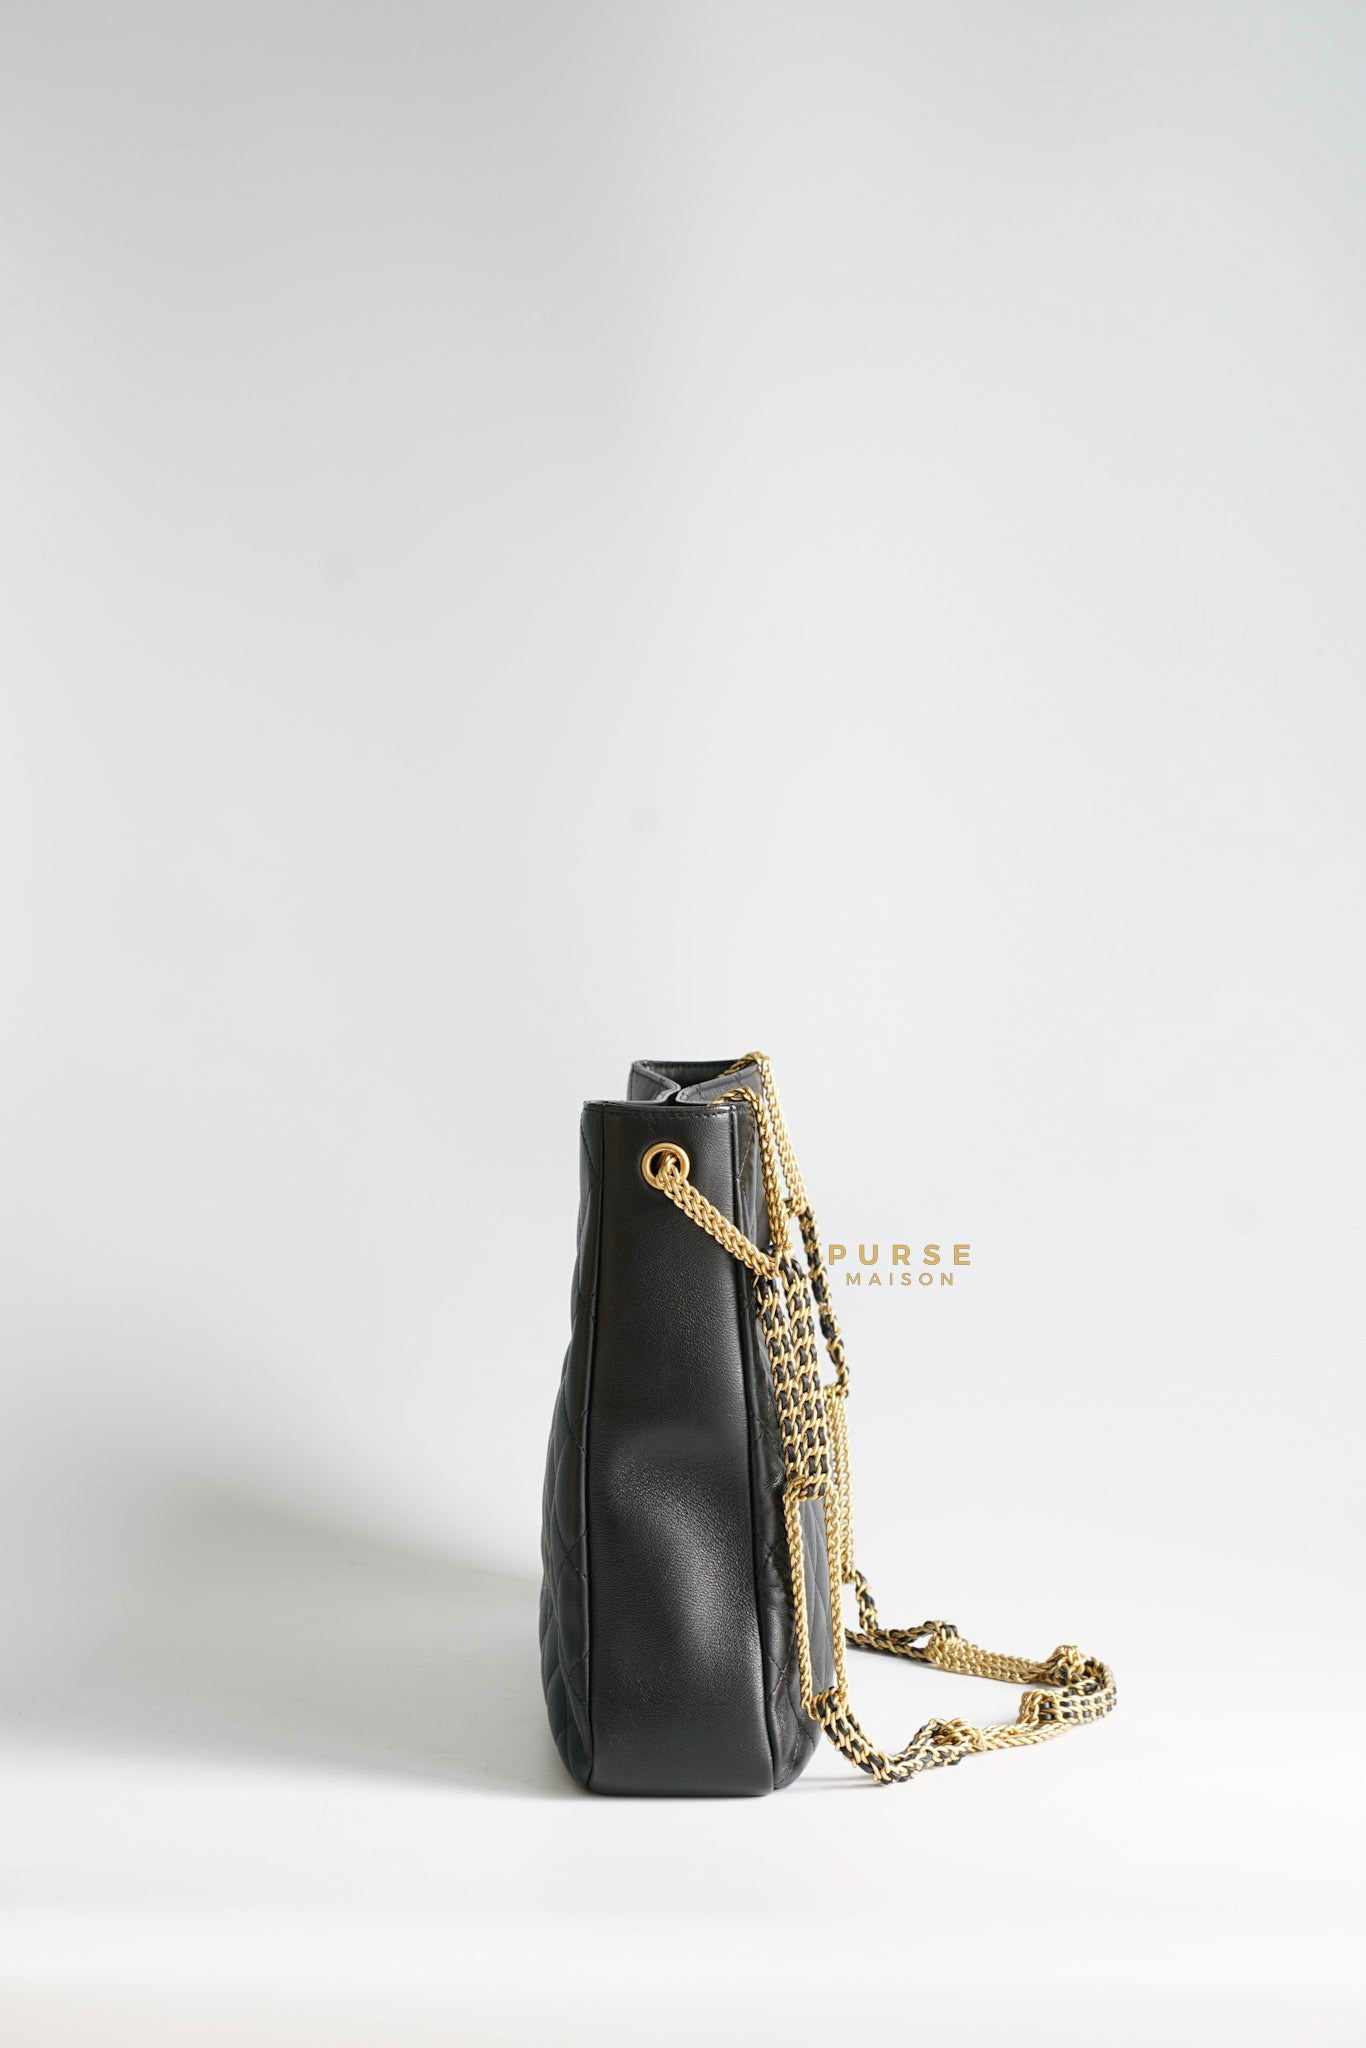 Chanel CC Black Lambskin Leather and Gold Hardware Hobo Tote Bag (Microchip)